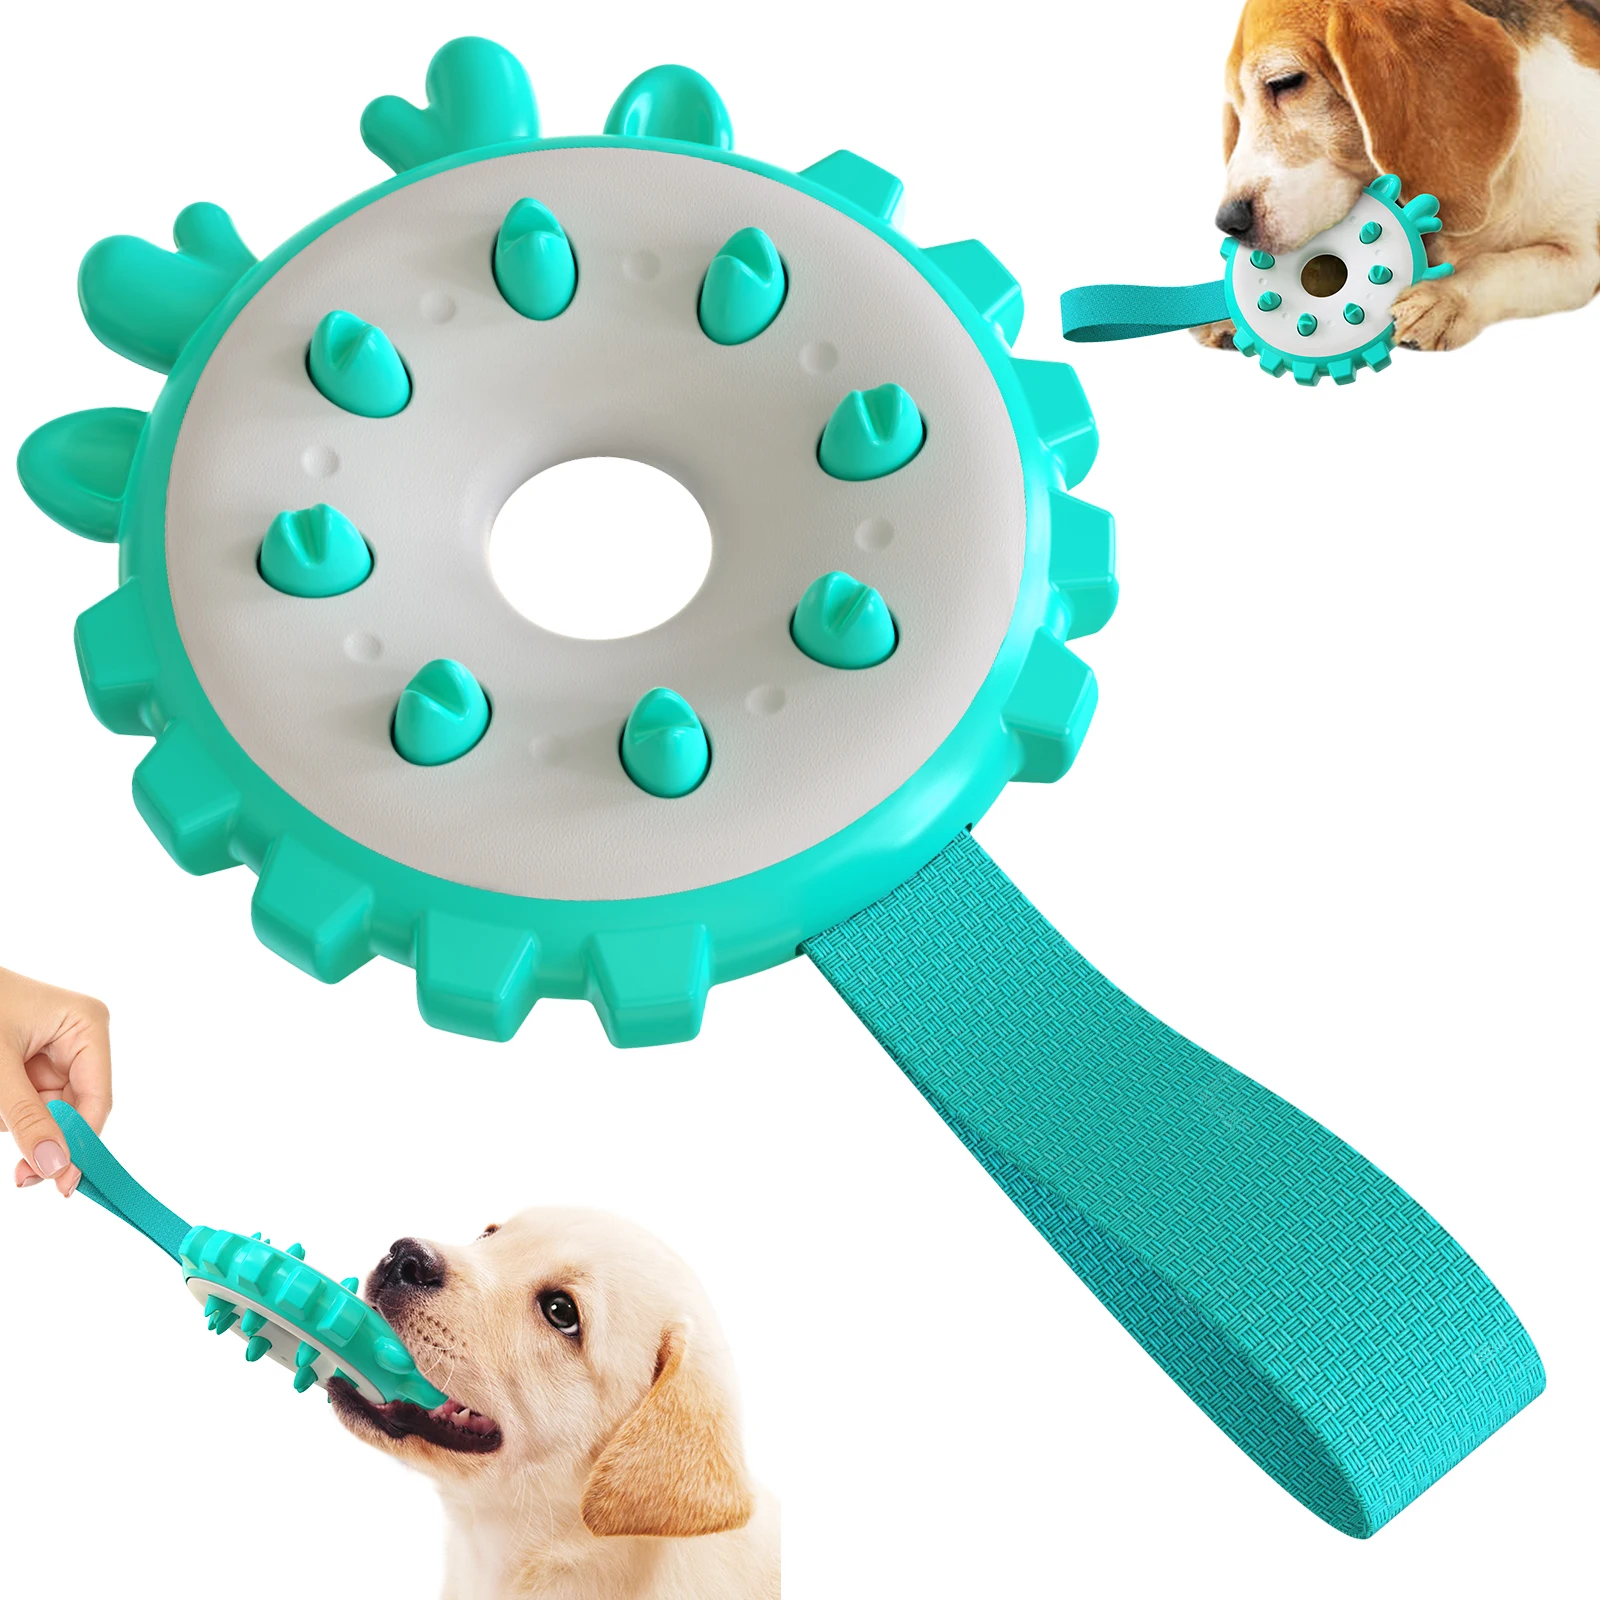 

Dog Toy Flying Saucer Resistant To Bite Molar Small and Medium-Sized Dogs Relieve Boredom Training Interactive Ring Pet Supplies